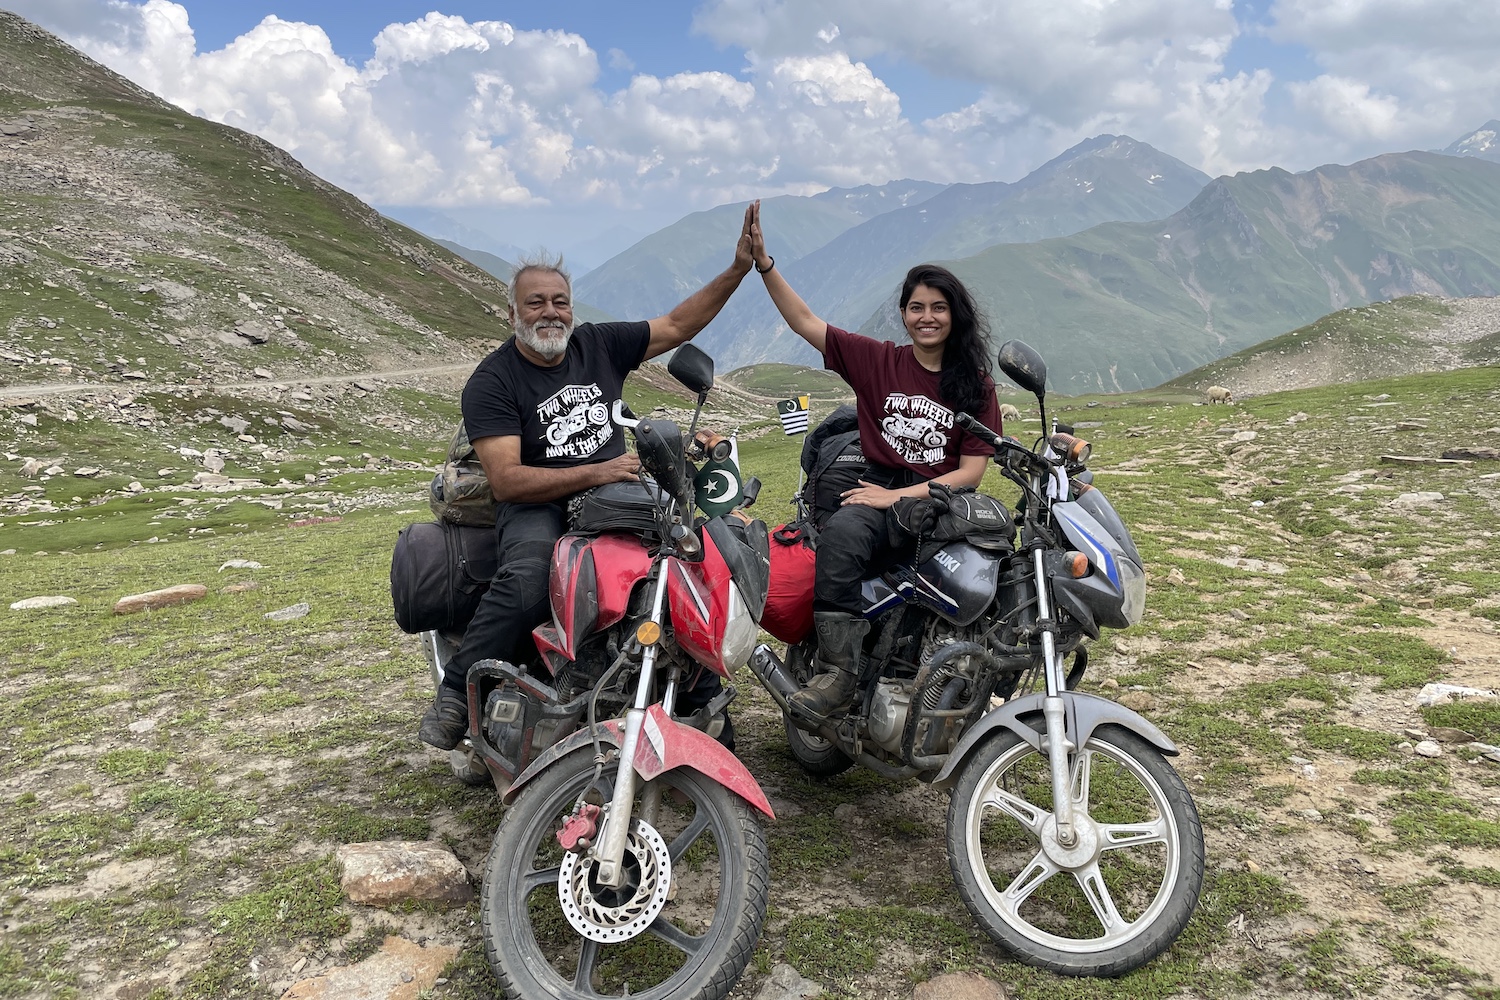 qazi and ghazal farooqi posing with their motorcycles in the mountains of pakistan